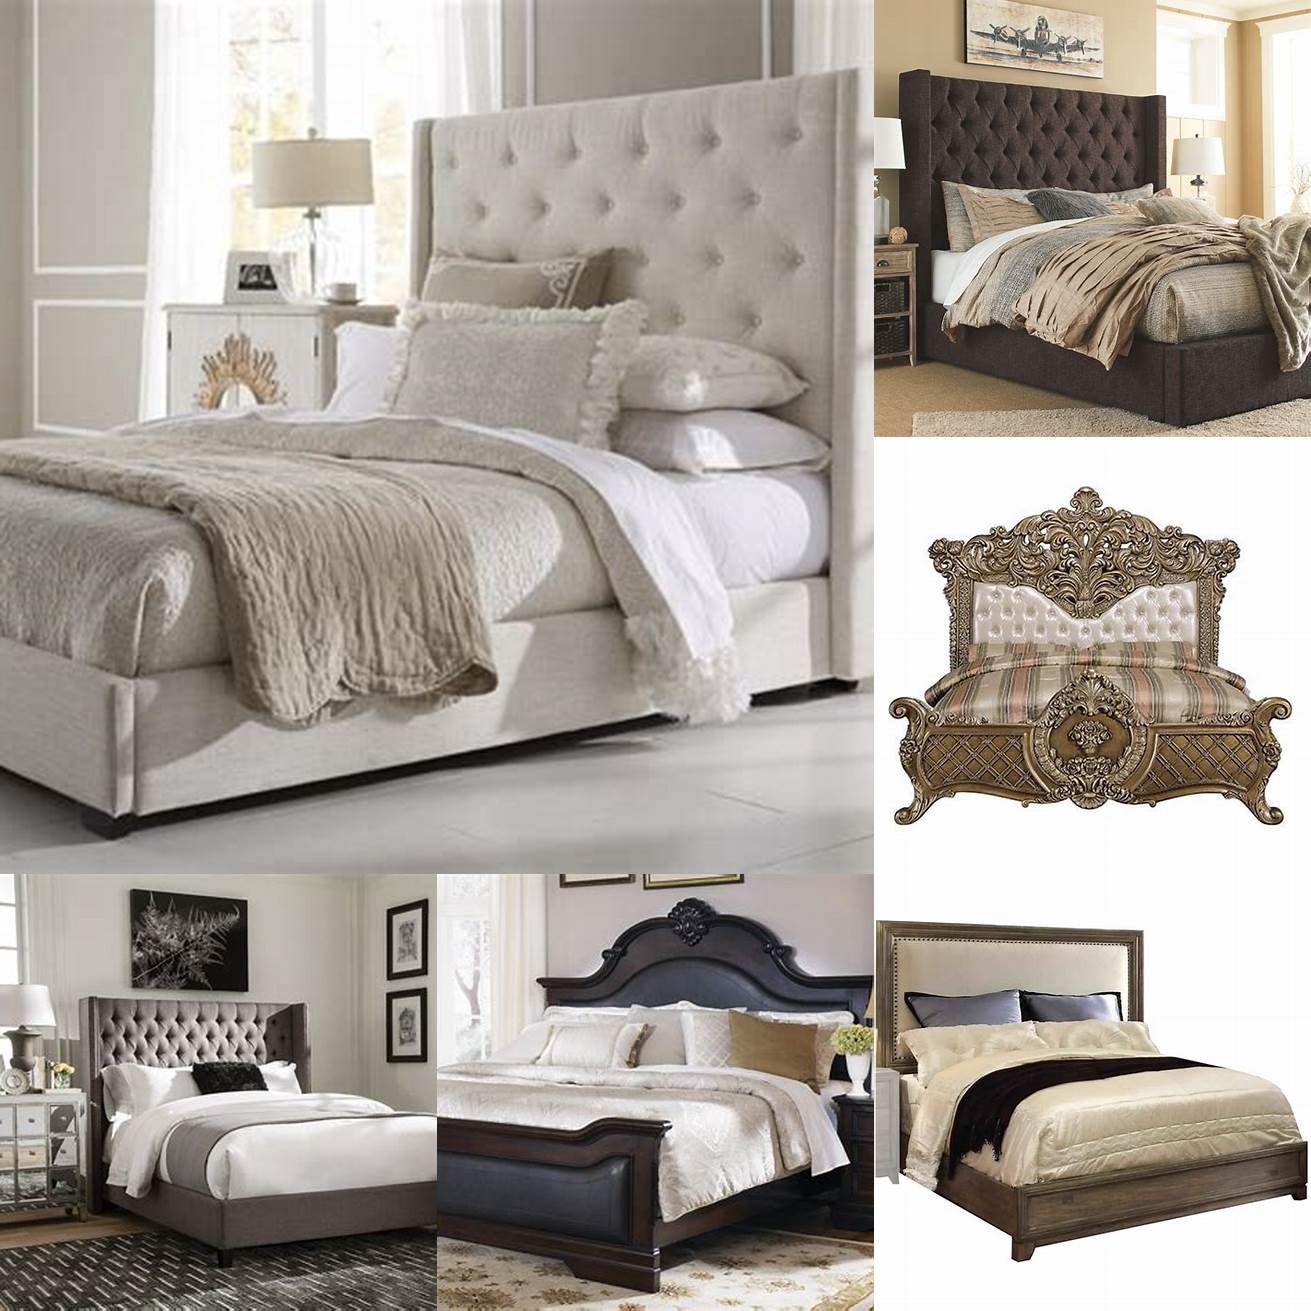 An elegant and sophisticated Upholstered Eastern King Bed with a padded headboard